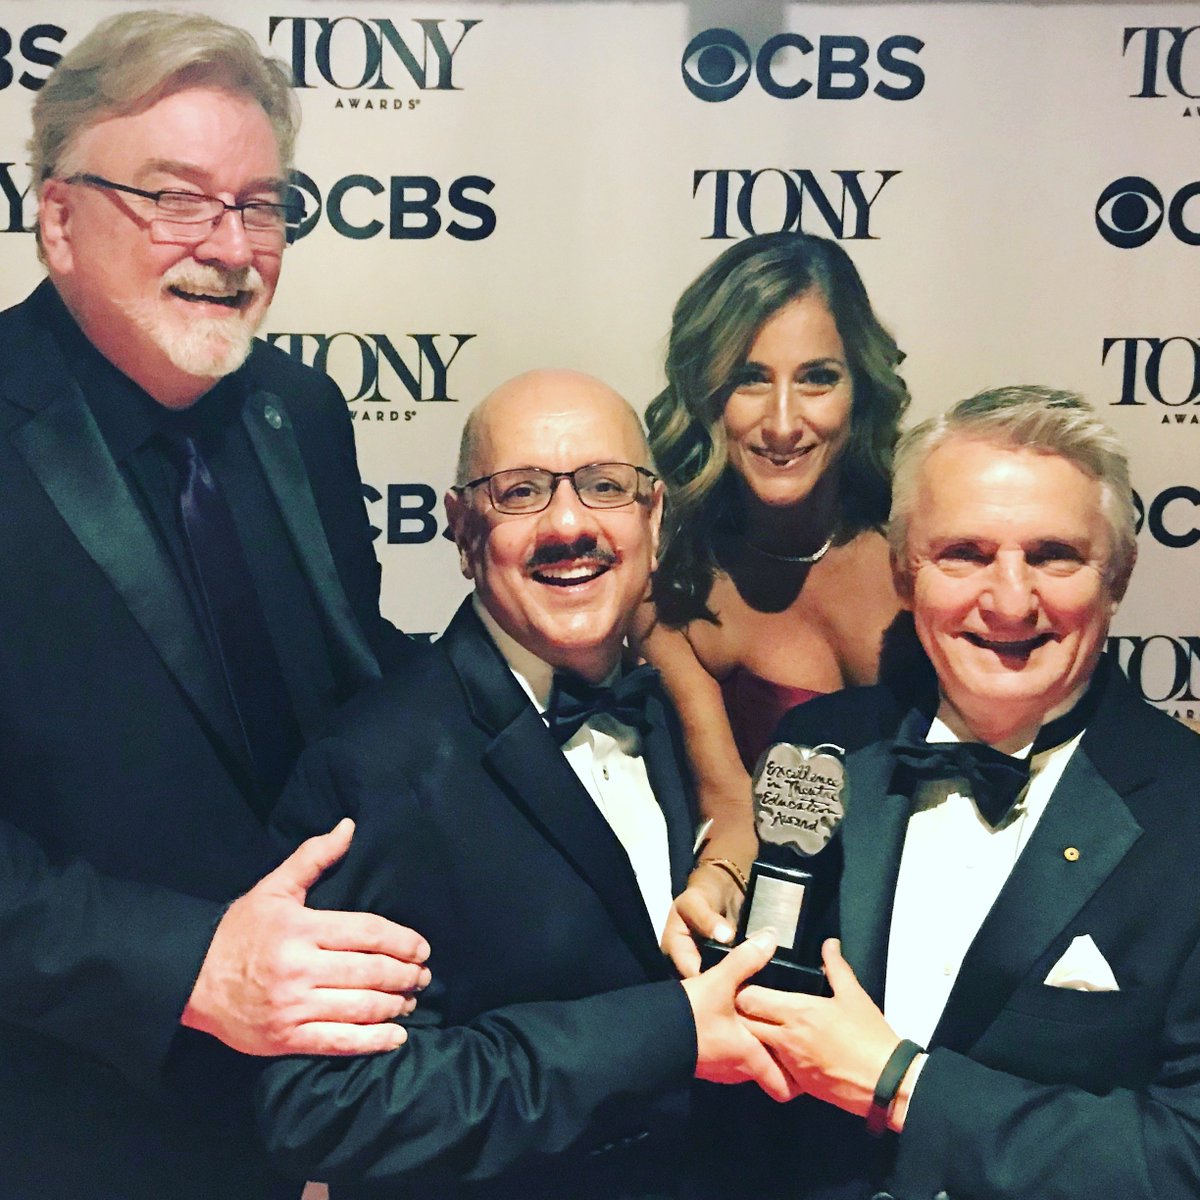 President Farnam Jahanian, Carnegie Mellon College of Fine Arts Dean Dan Martin and @cmudrama Head Peter Cooke with the 2018 Excellence in Theatre Education Award winner, Melody Herzfeld after she was honored on @TheTonyAwards stage tonight. #cmutonys #applaudmyteacher